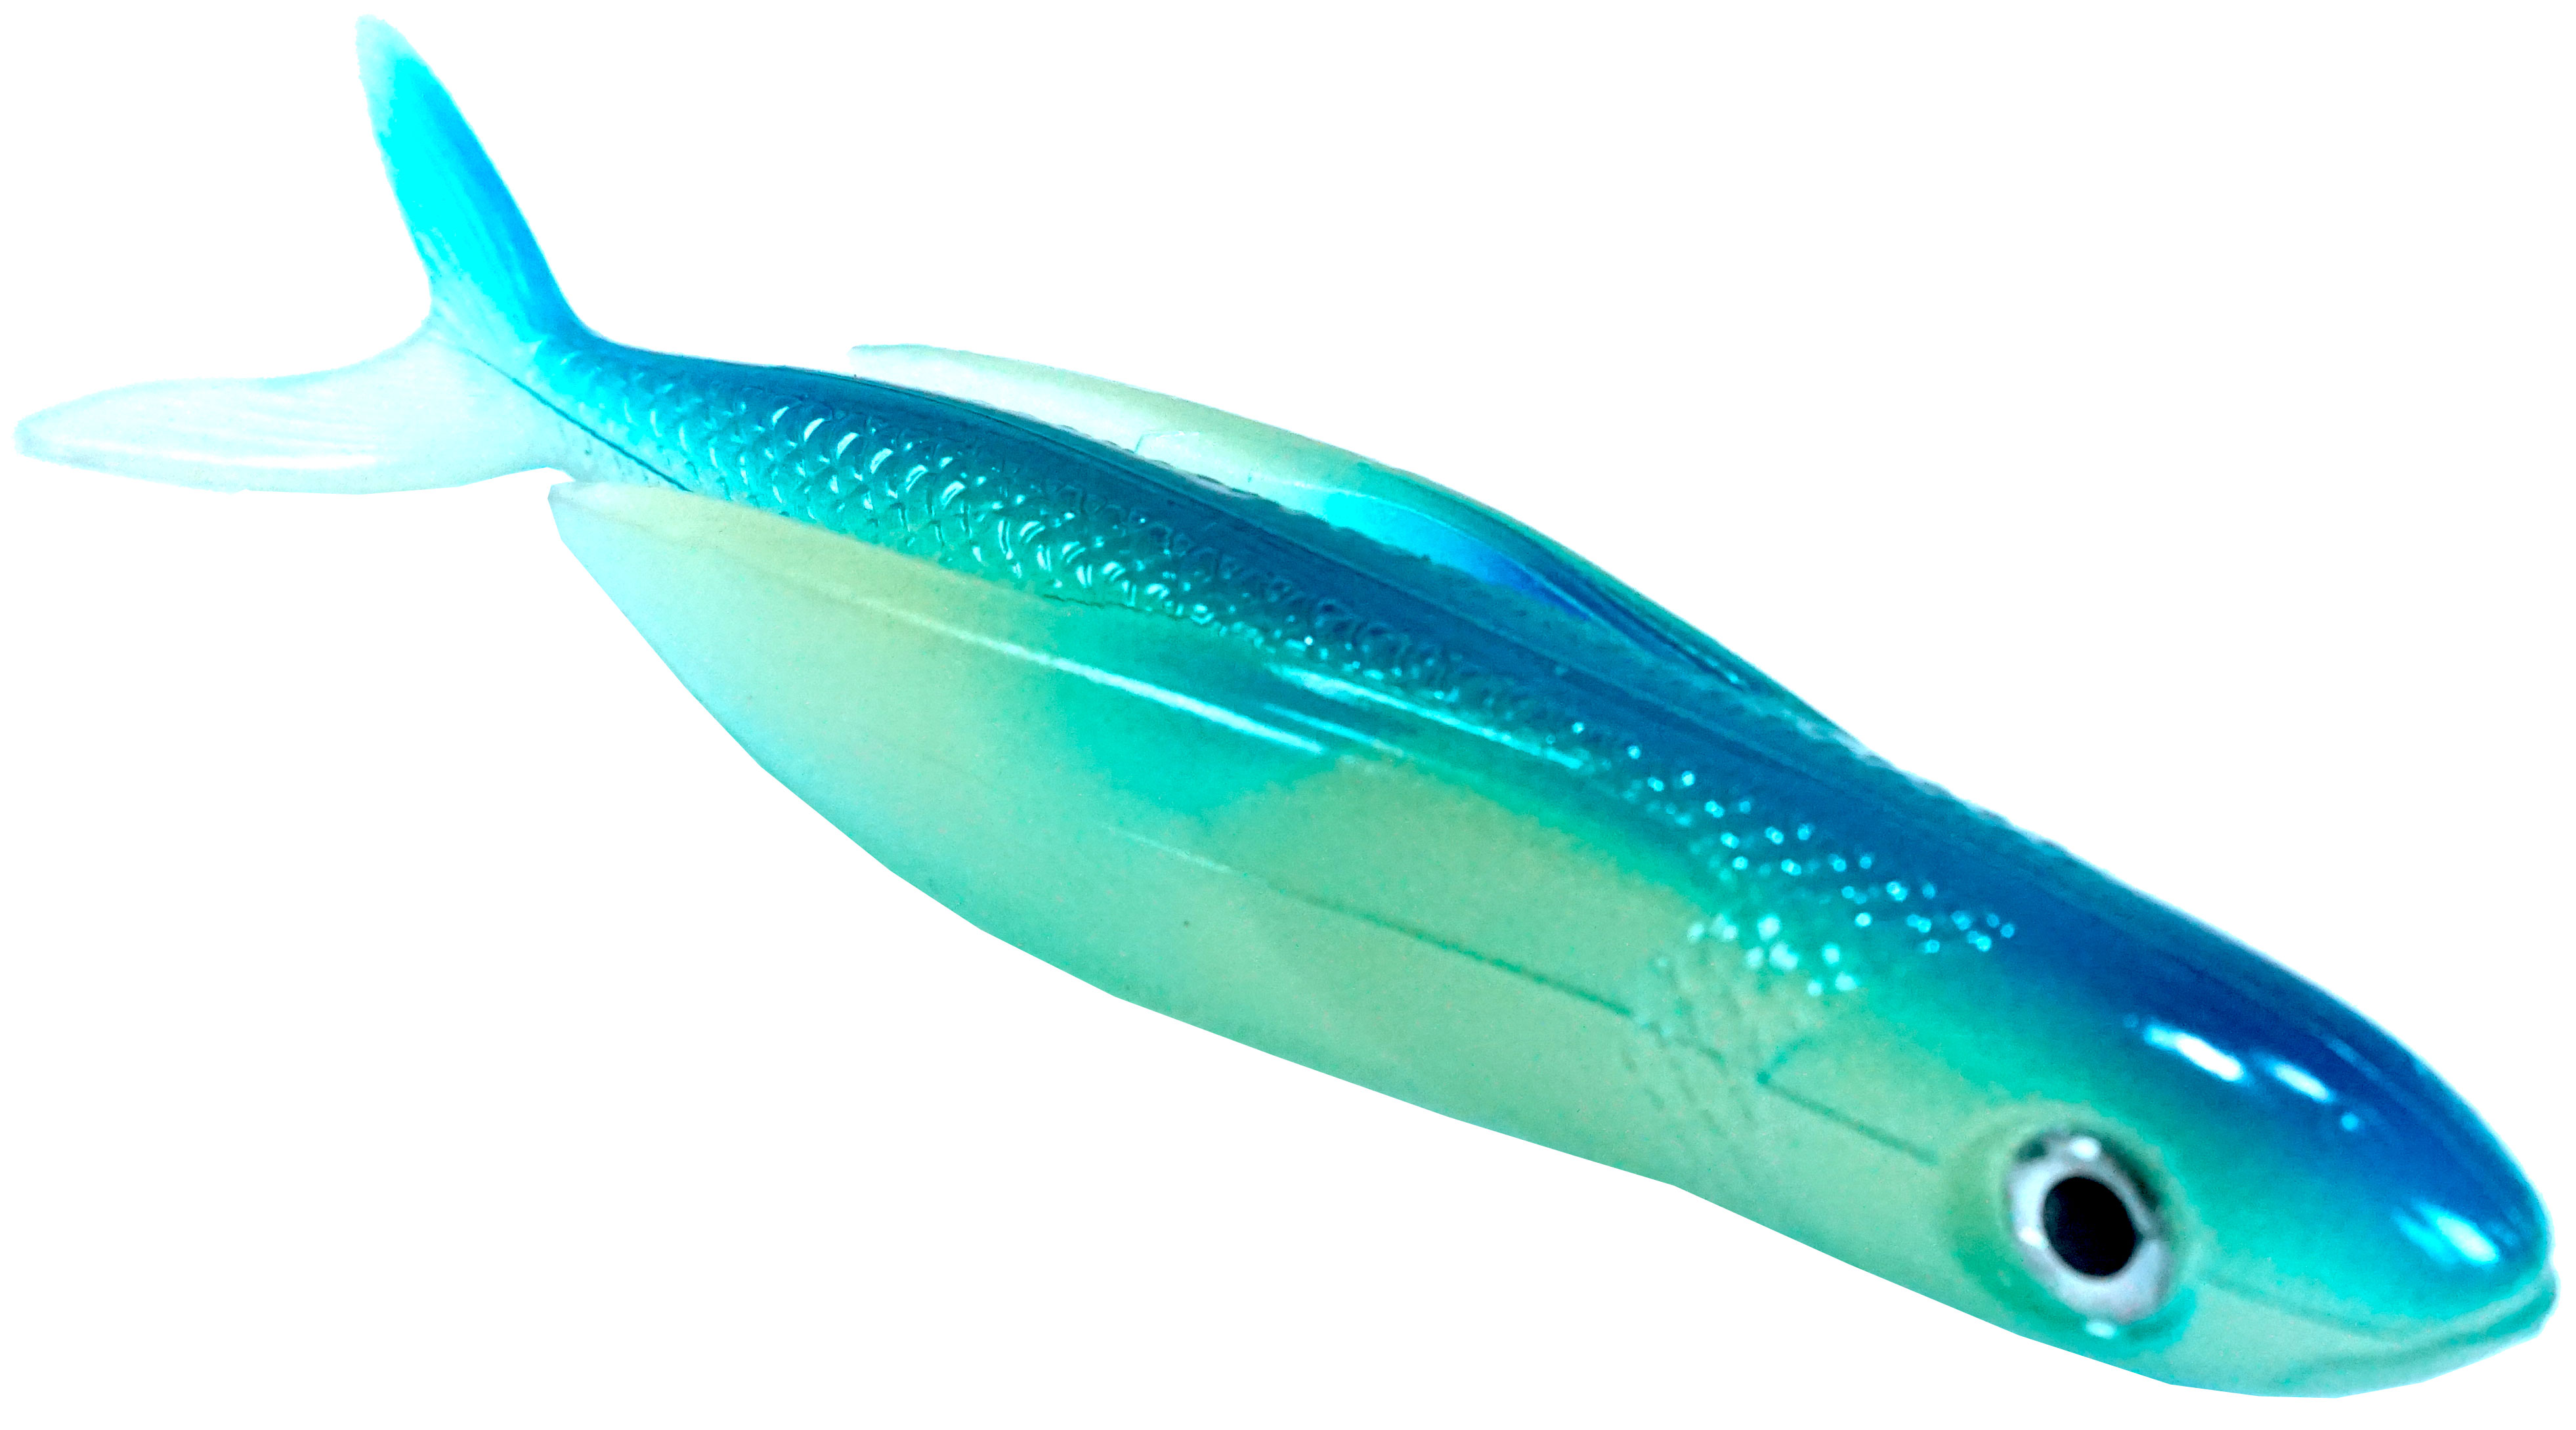 Almost Alive Lures 8.5" Soft Plastic Flying Fish with Swept Back Wing Bait Bright Blue/Glow